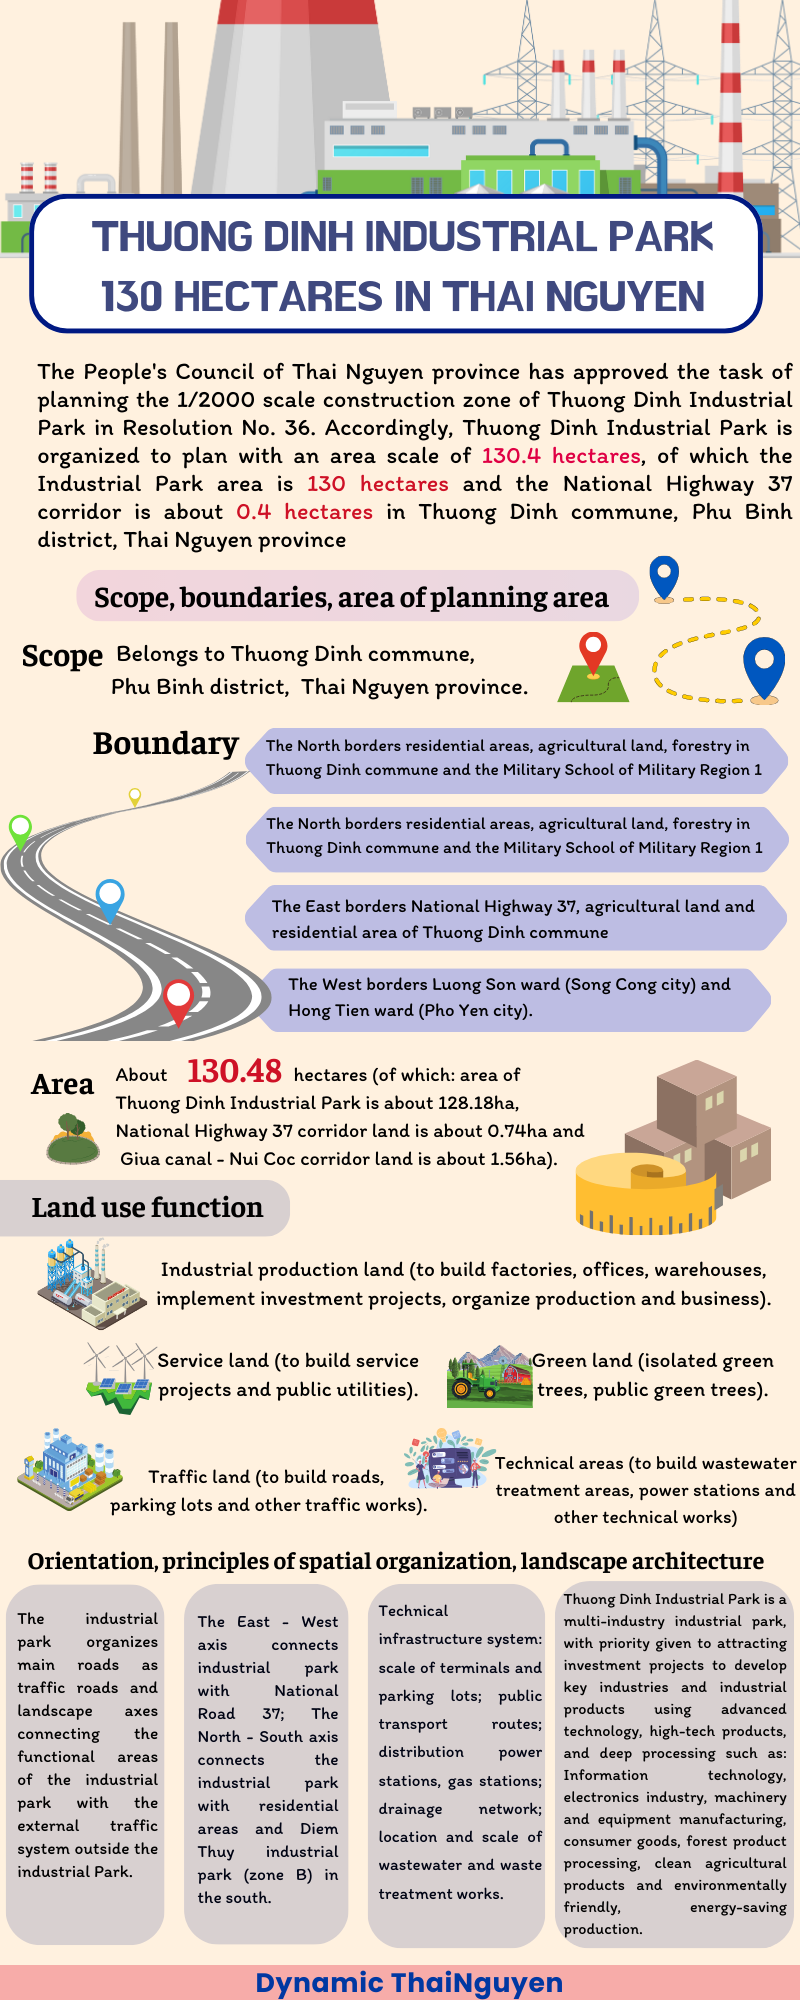 [Infographic] Thuong Dinh Industrial Park 130 hectares in Thai Nguyen